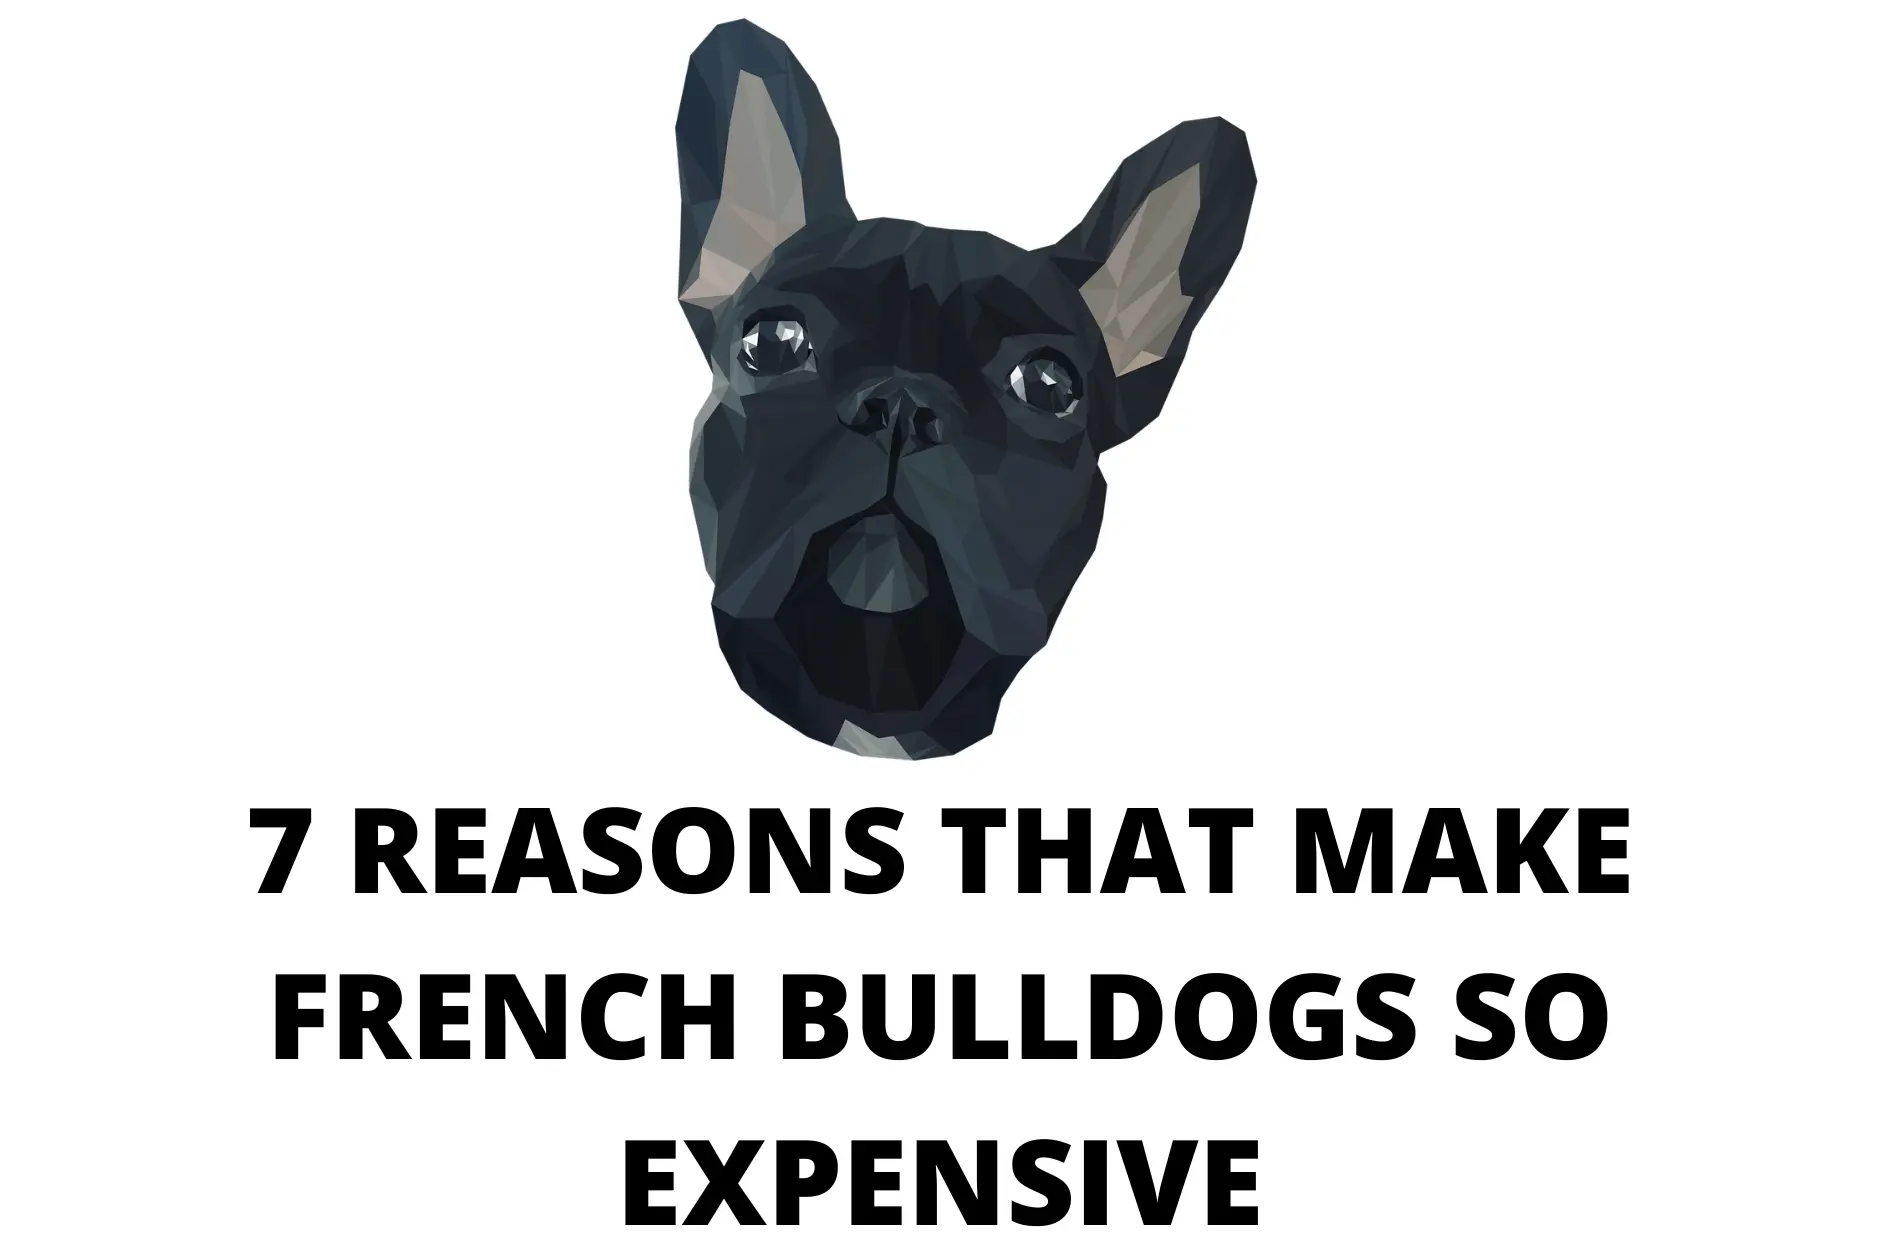 Why are french bulldogs so expensive?